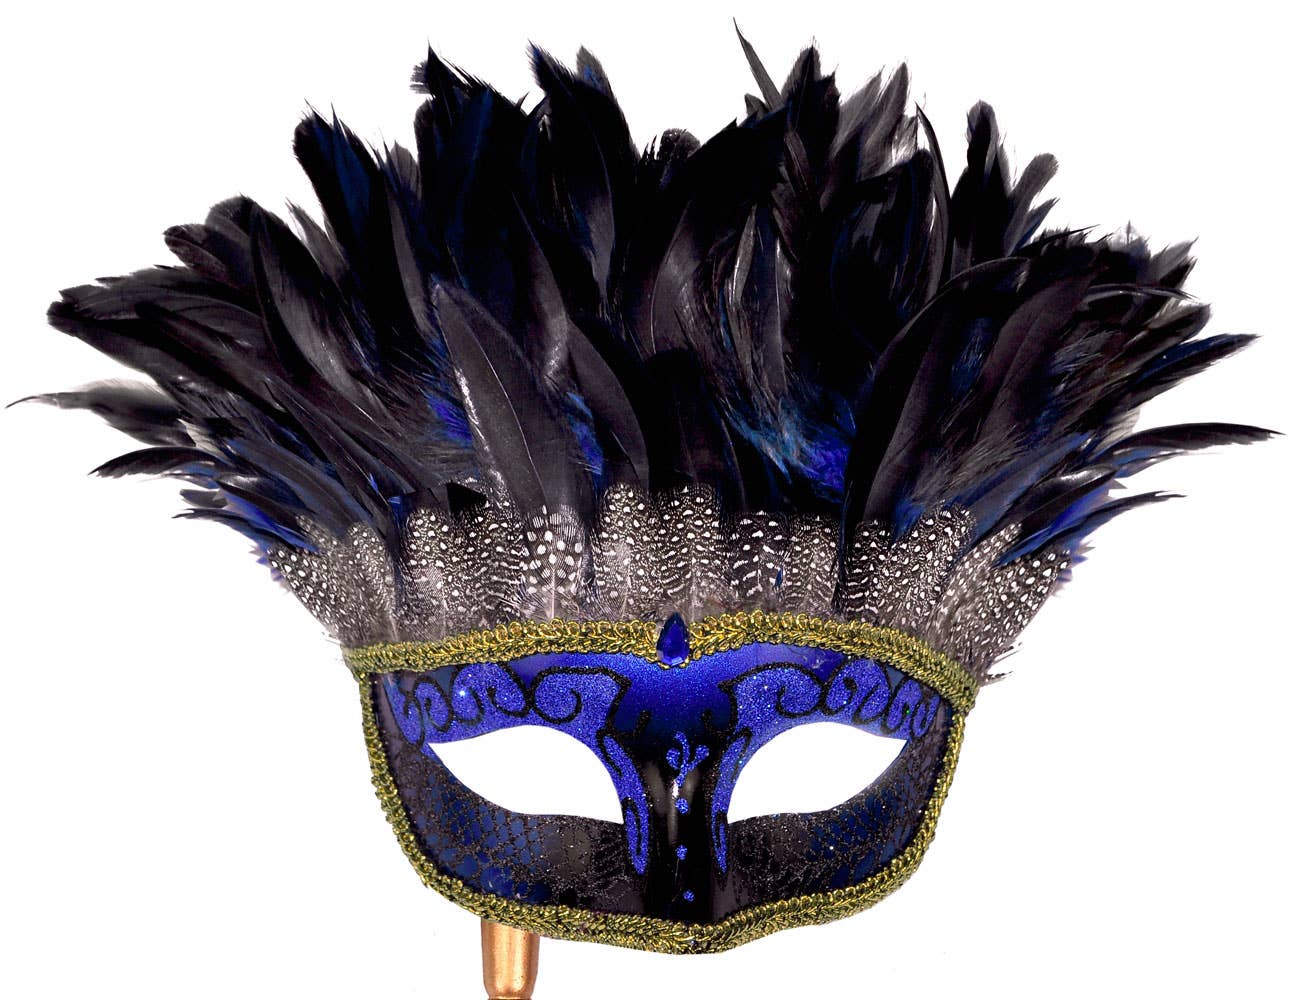 Hand Held Blue and Gold Half Face Masquerade Mask with Feathers - View 2